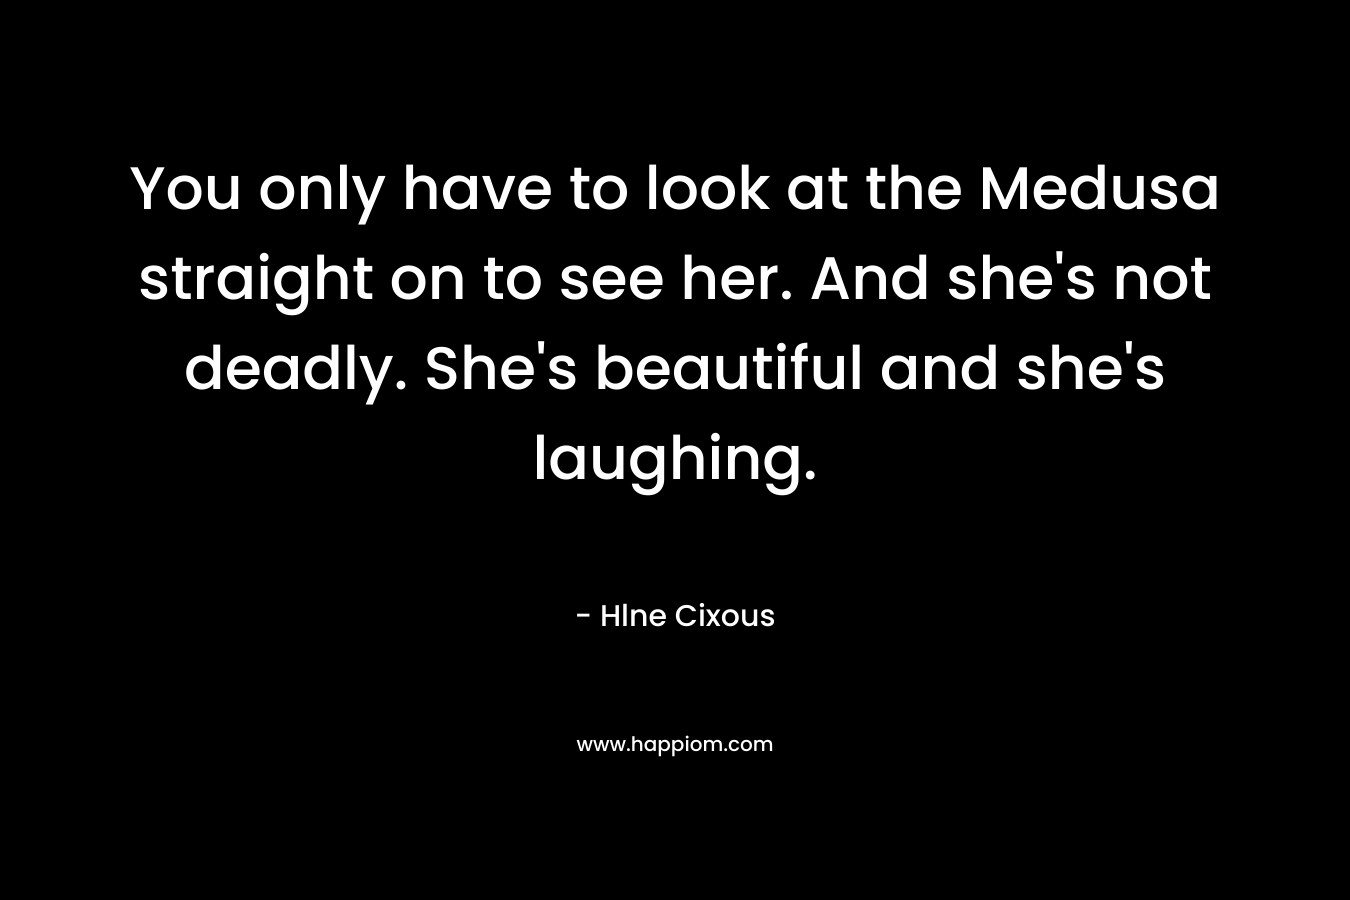 You only have to look at the Medusa straight on to see her. And she’s not deadly. She’s beautiful and she’s laughing. – Hlne Cixous